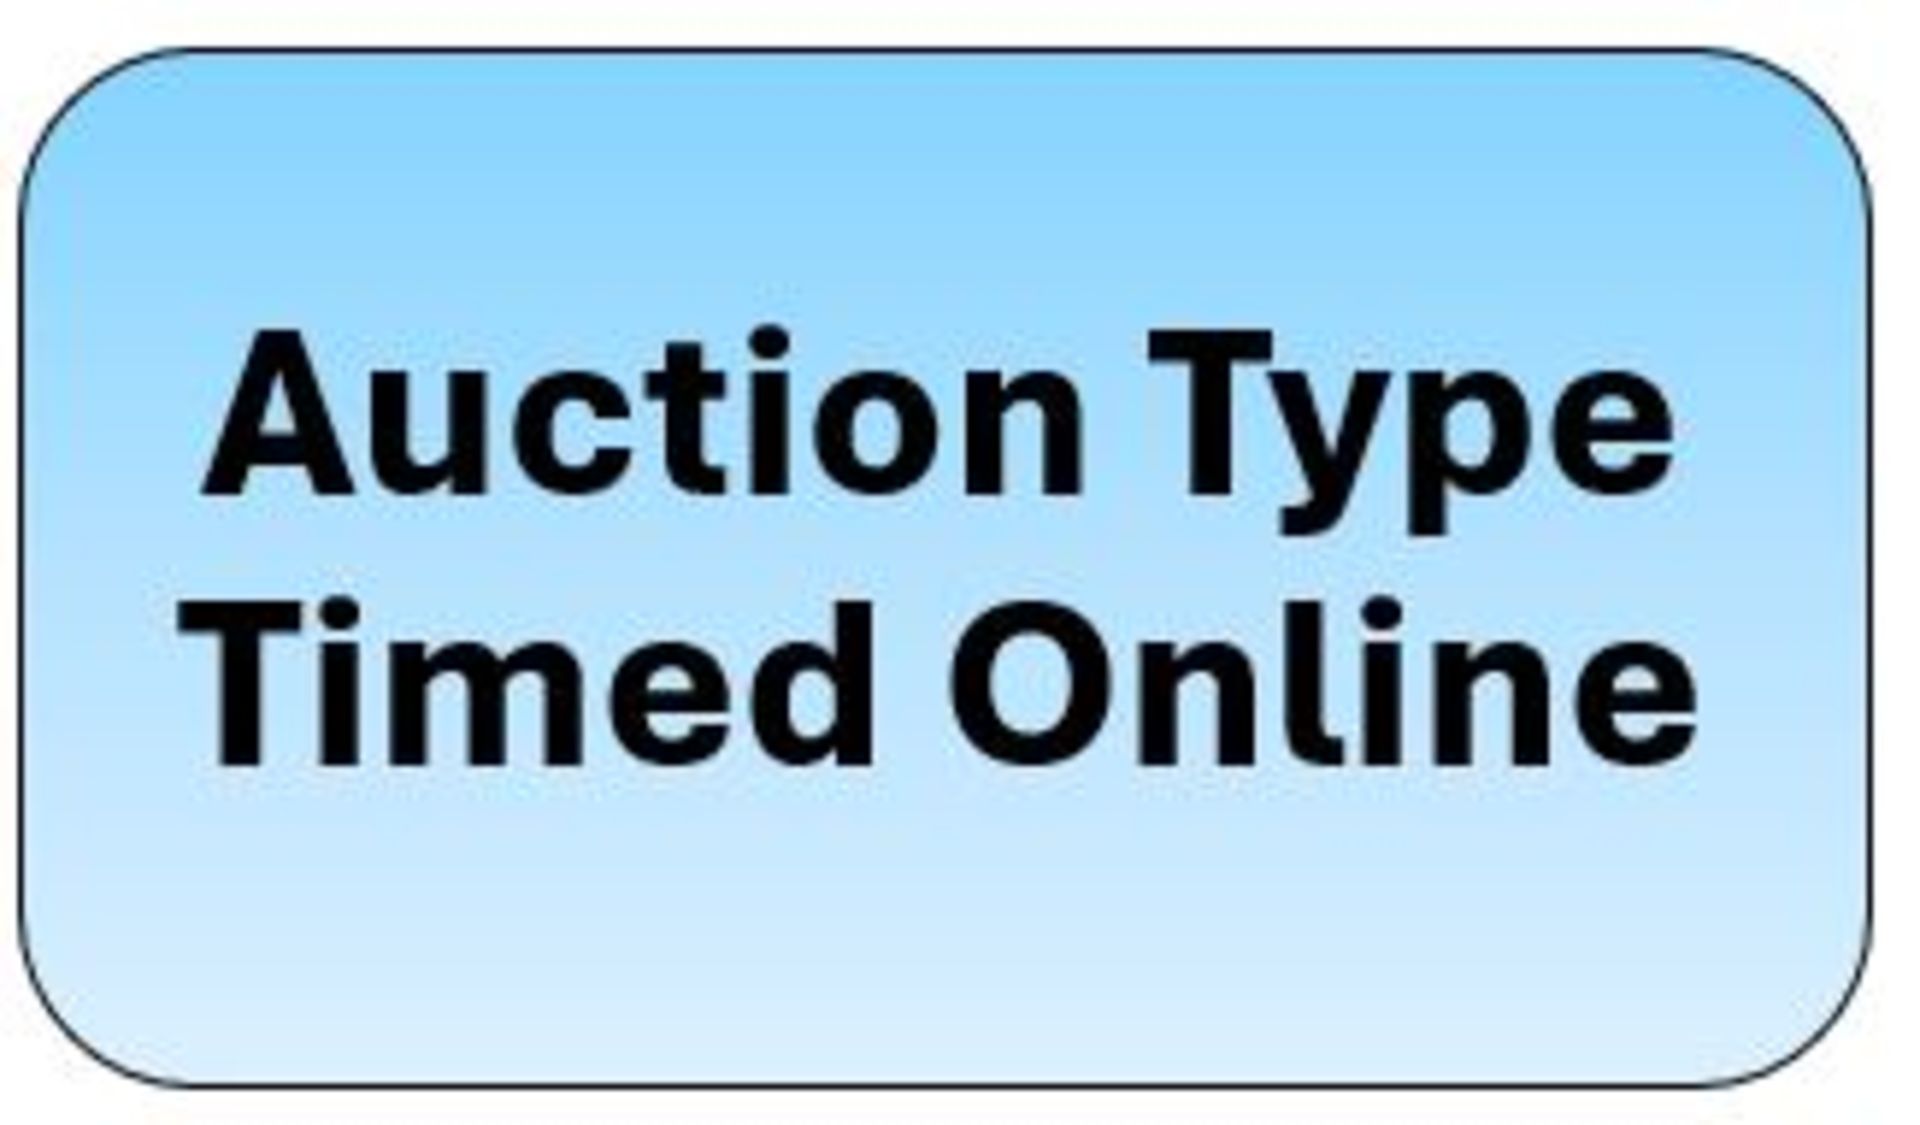 IMPORTANT NOTICE – This is a timed online only auction.